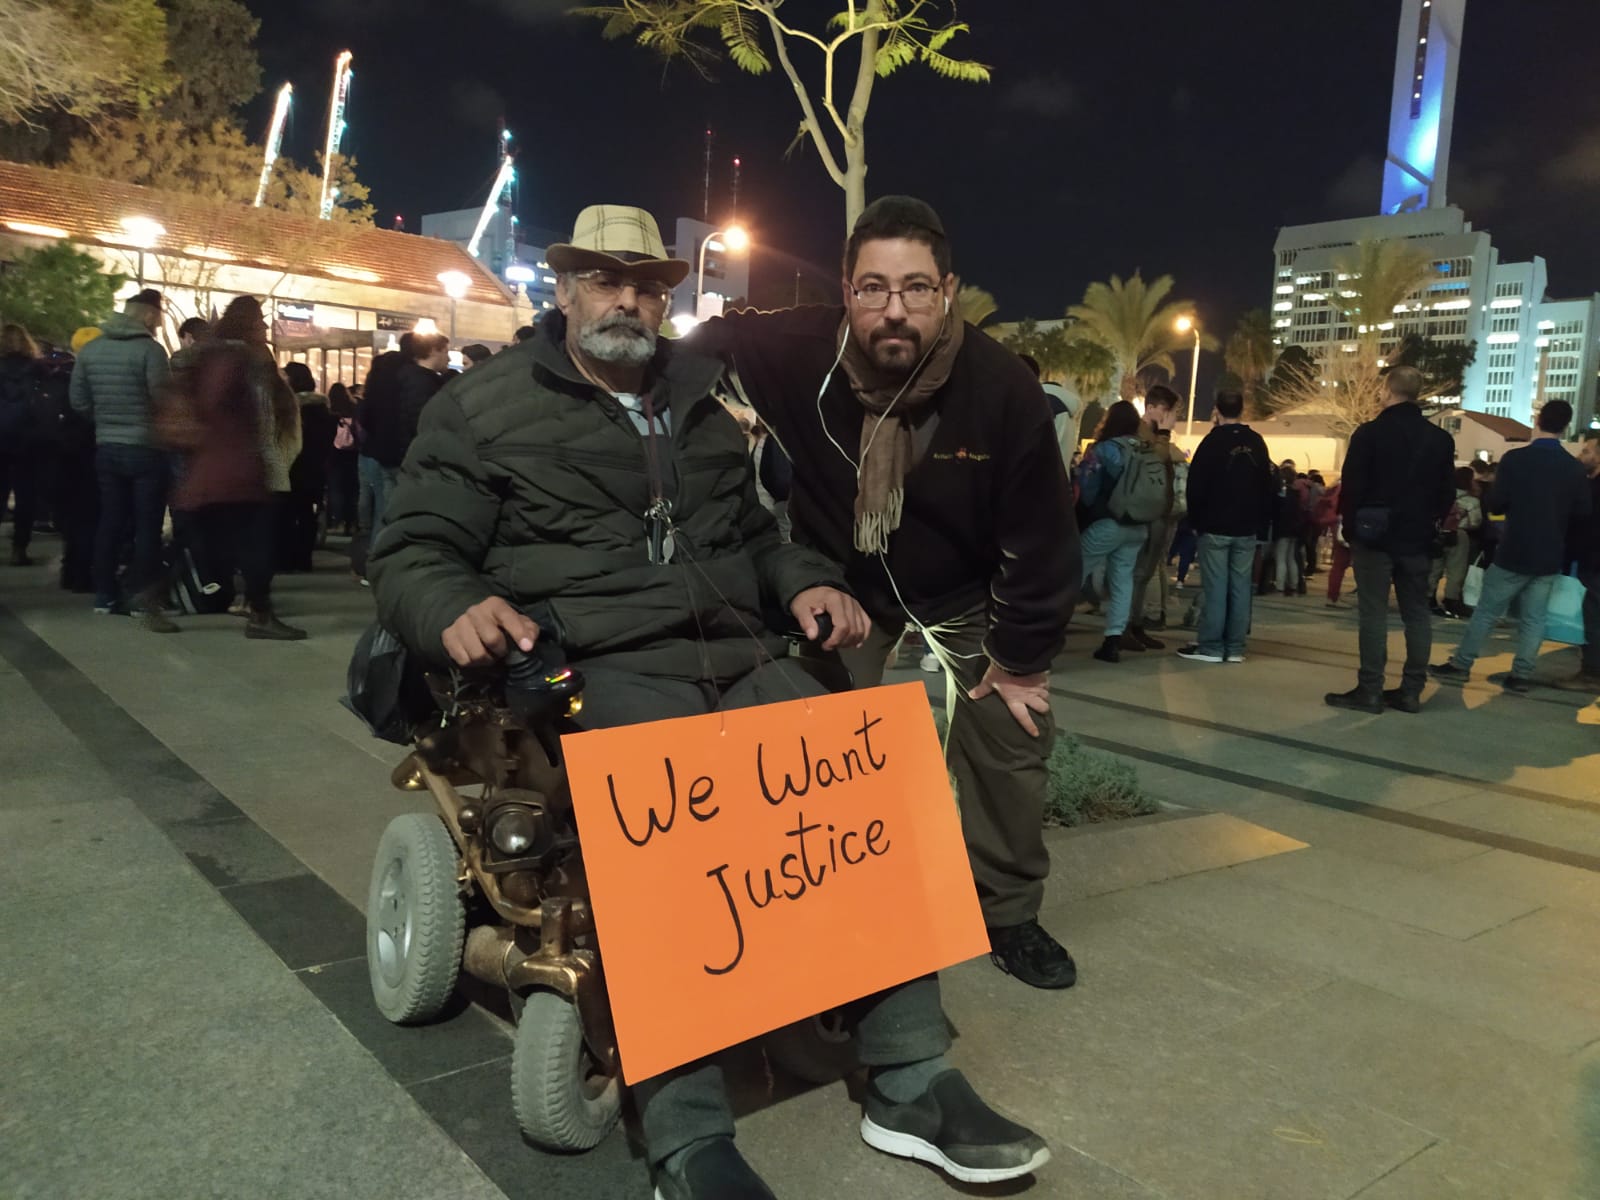 Demonstrators with a sign at the disability benefits protest in Tel Aviv, Jan. 30, 2020. Photograph: Nizzan Zvi Cohen